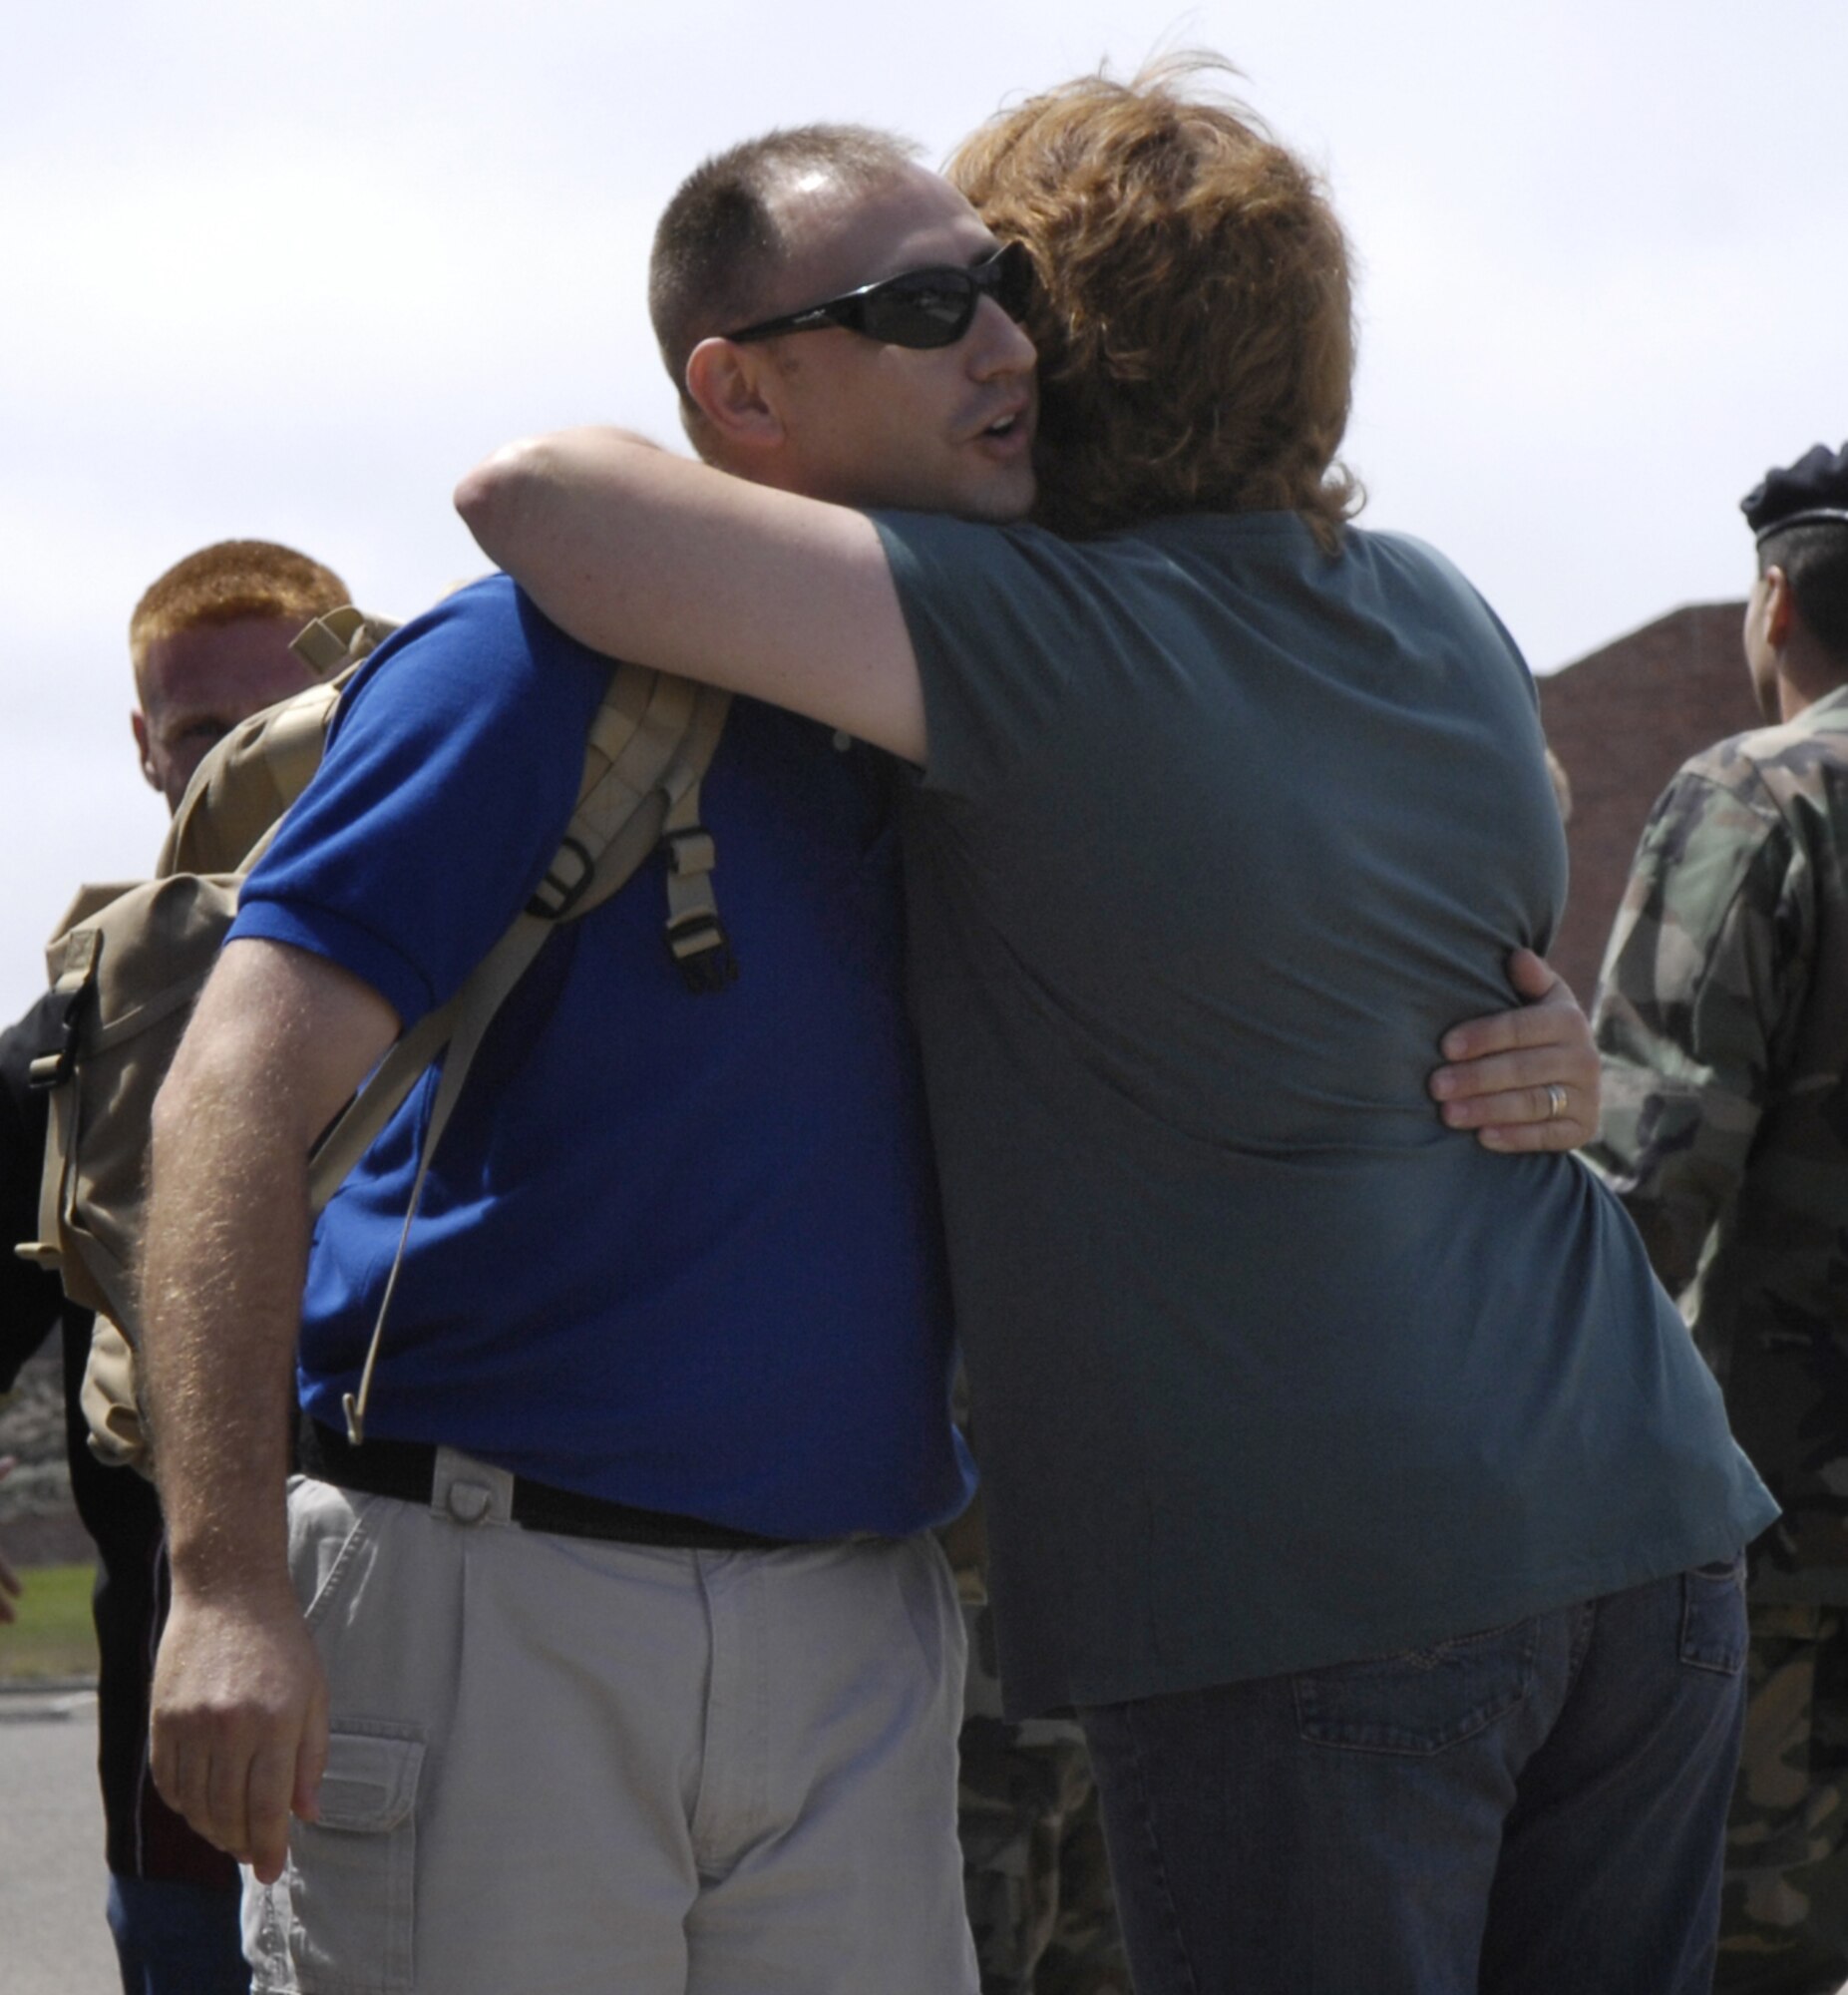 VANDENBERG AIR FORCE BASE, Calif. -- Tech. Sgt. Michael Fries, 30th Security Forces Squadron, hugs his wife, Debra, as he returns home from a deployment on Aug. 22. The 25 Airman, who compose 2 teams, returned from a six-month deployment at Al Udied, Qatar.  (U.S. Air Force photo/Airman Jonathan Olds)